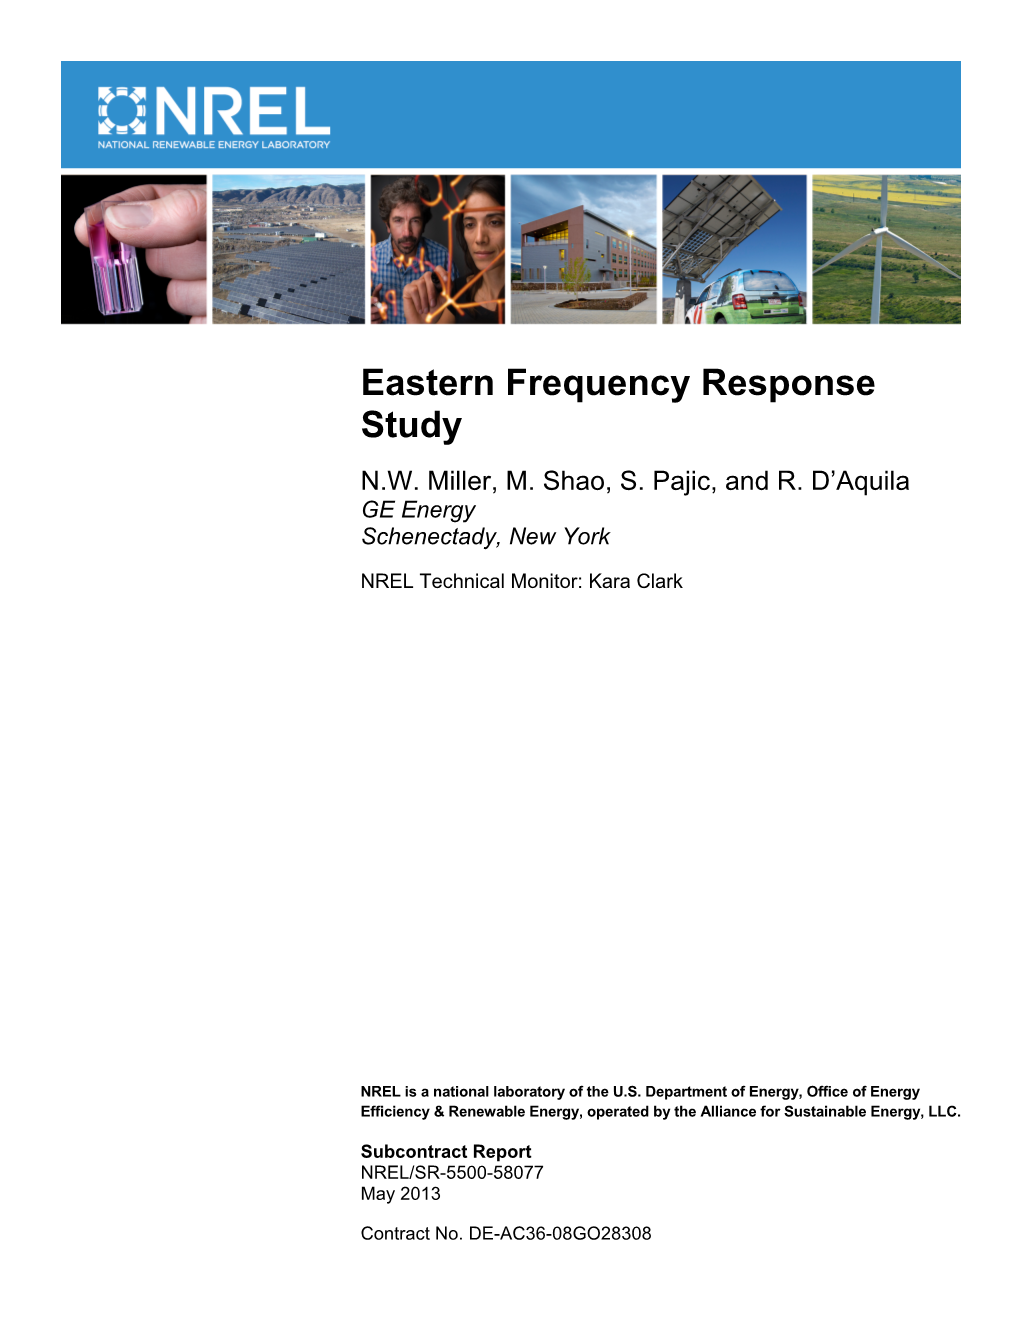 Eastern Frequency Response Study N.W